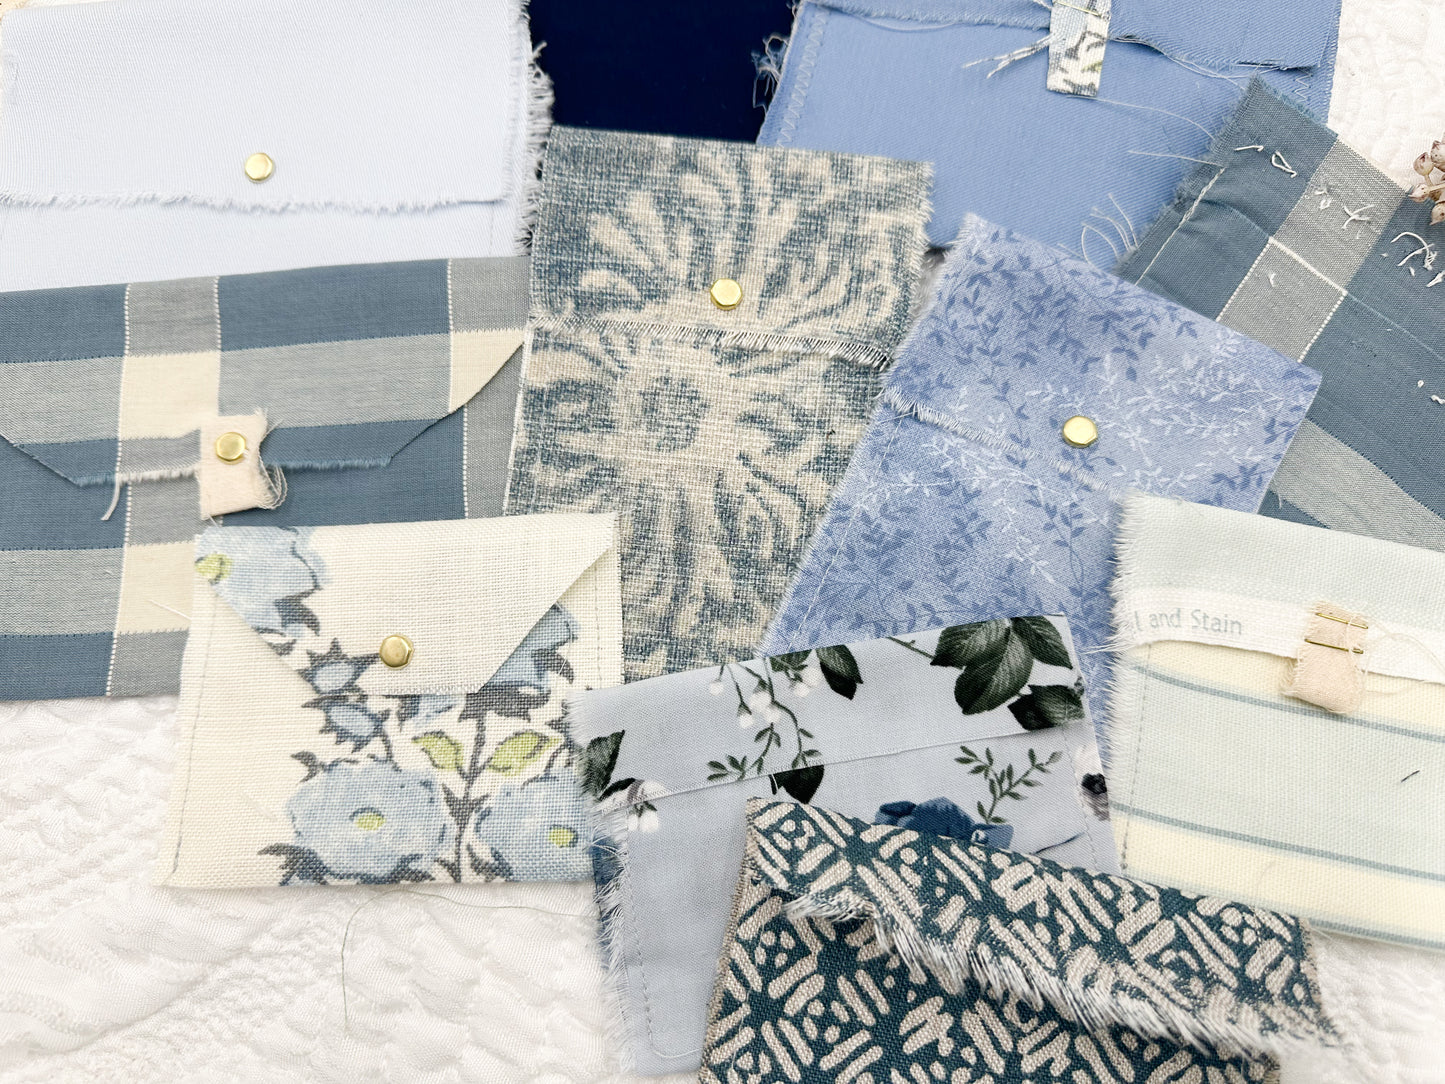 Rough Sewn Fabric Pockets and Pages in shades of Blue